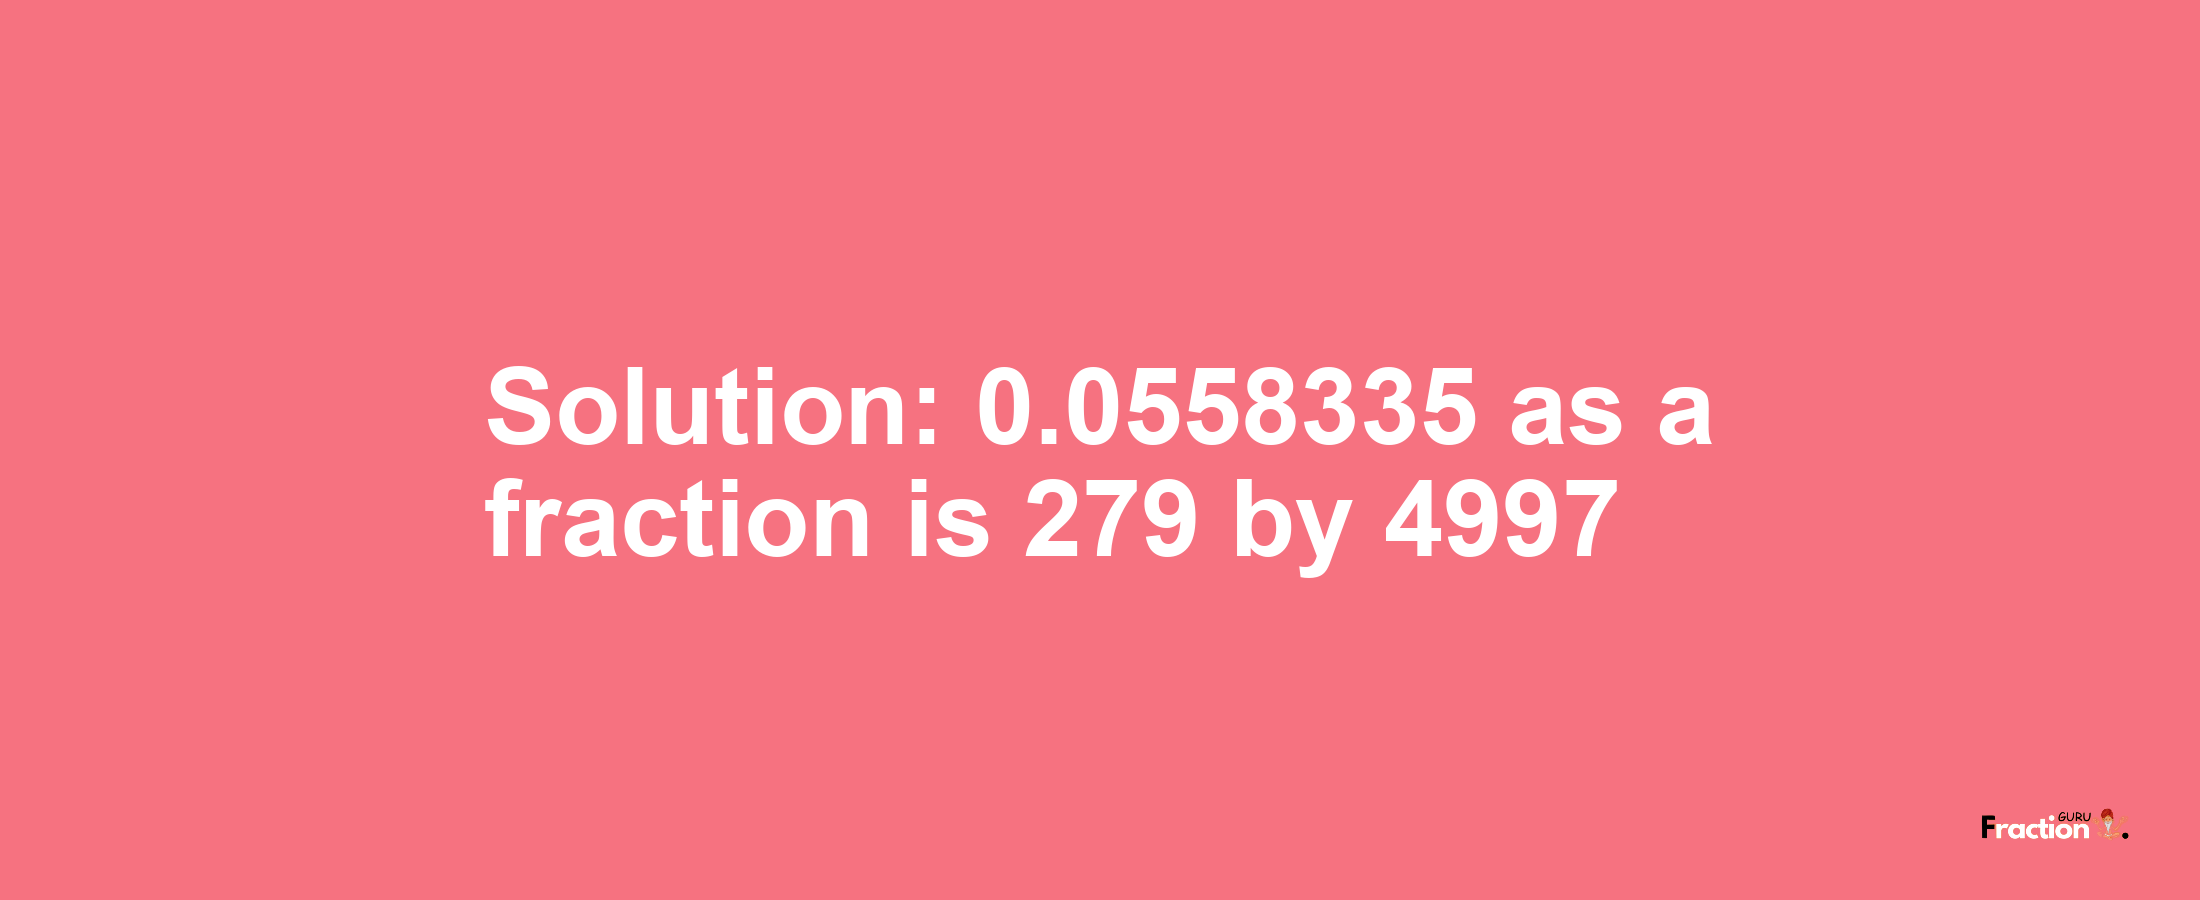 Solution:0.0558335 as a fraction is 279/4997